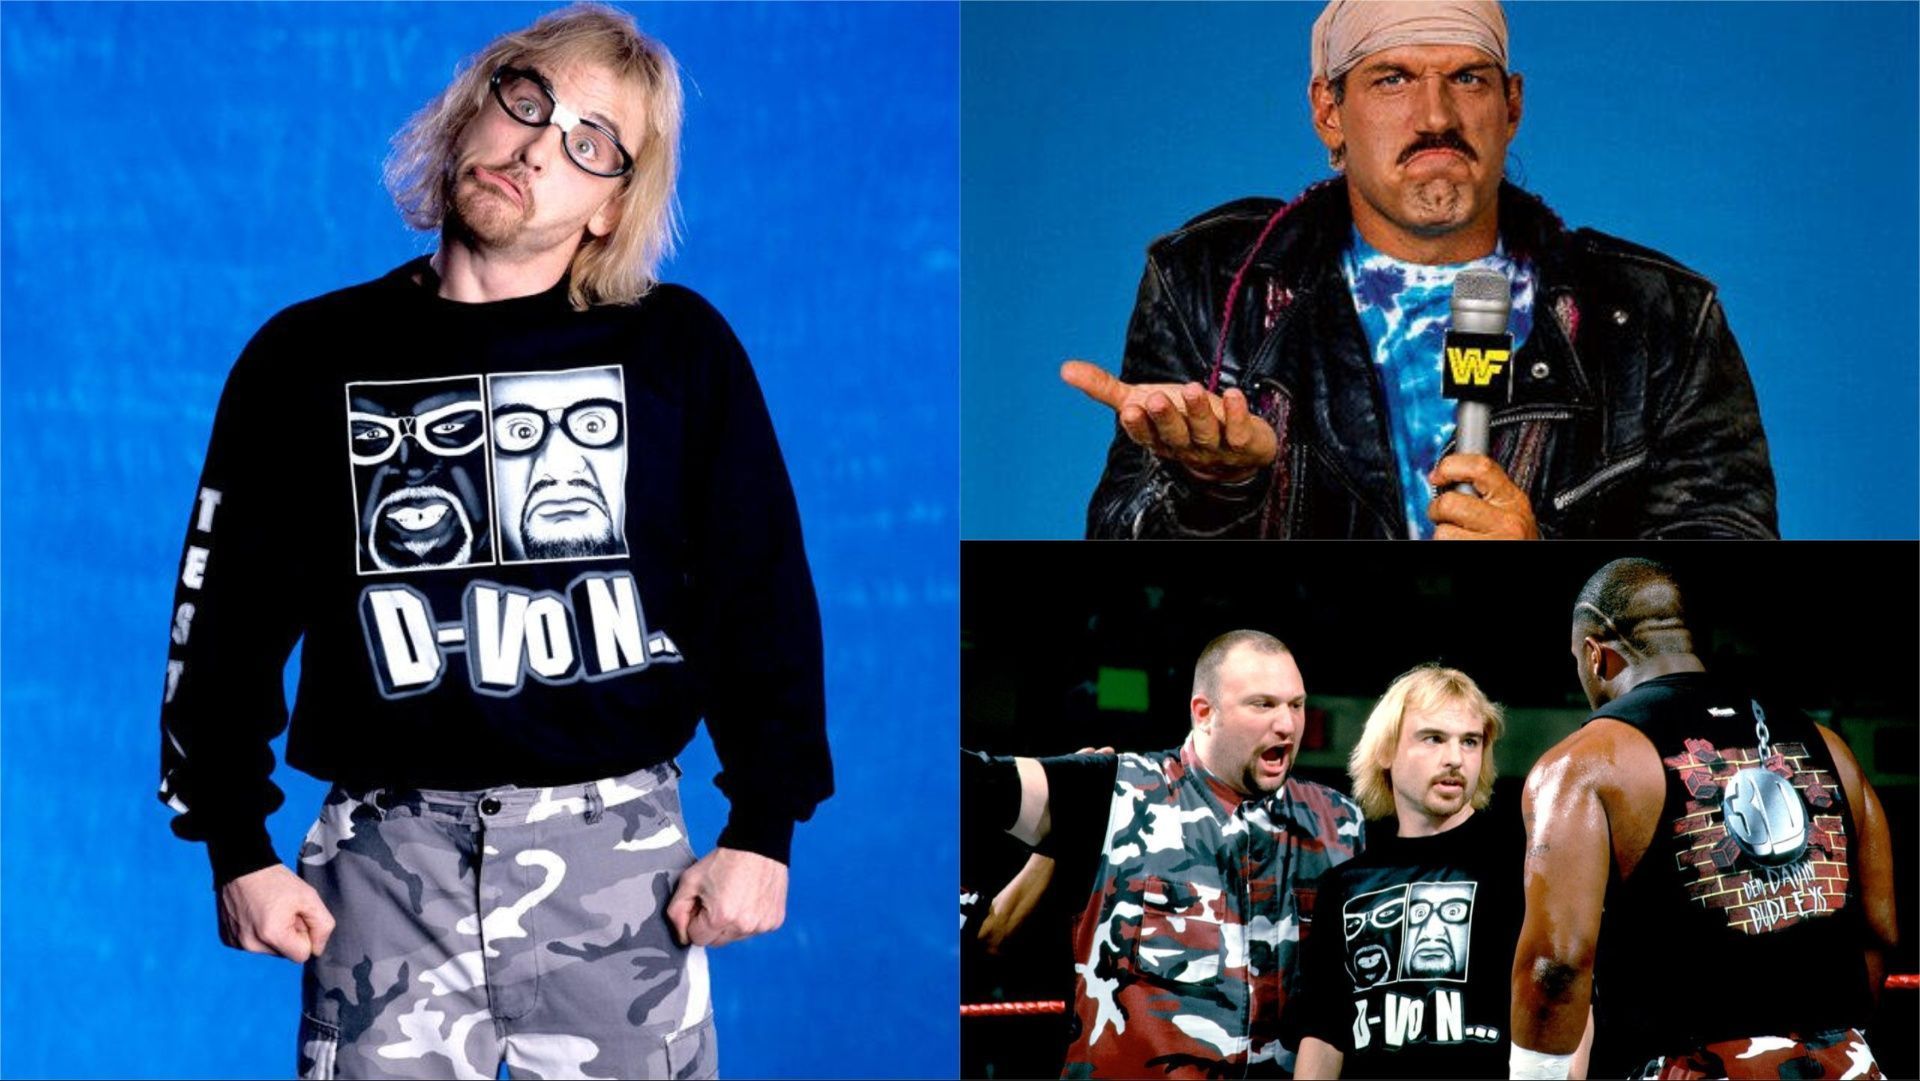 Will former Minnesota Gov. Jesse &quot;The Body&quot; Ventura and Spike Dudley sign a WWE Legends deal?